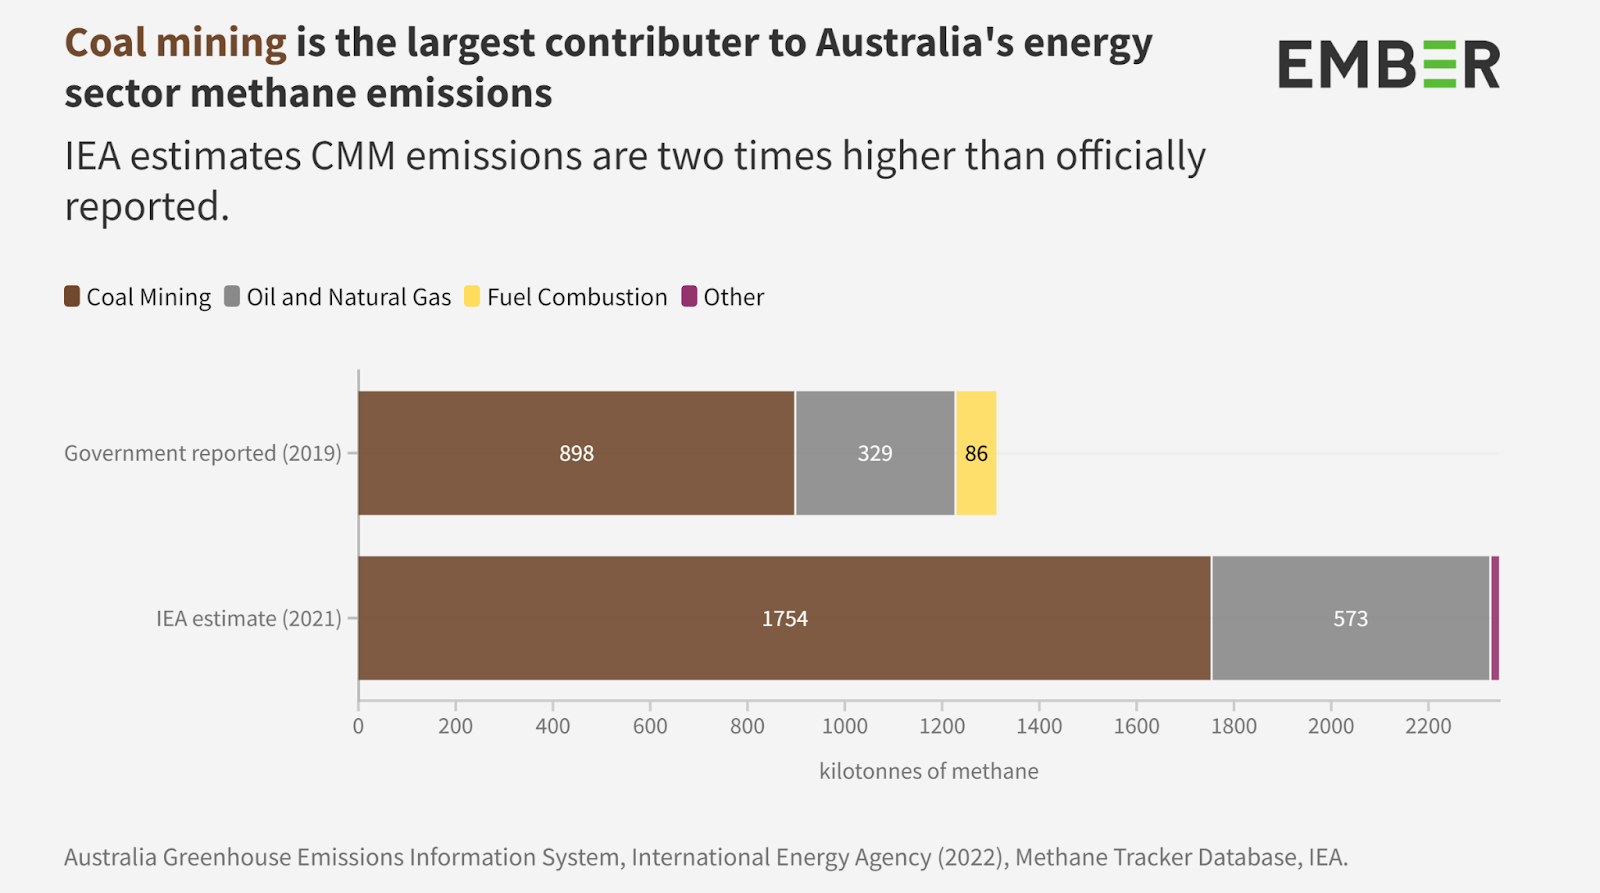 A chart showing that coal mining is the largest contributor to energy sector methane emissions